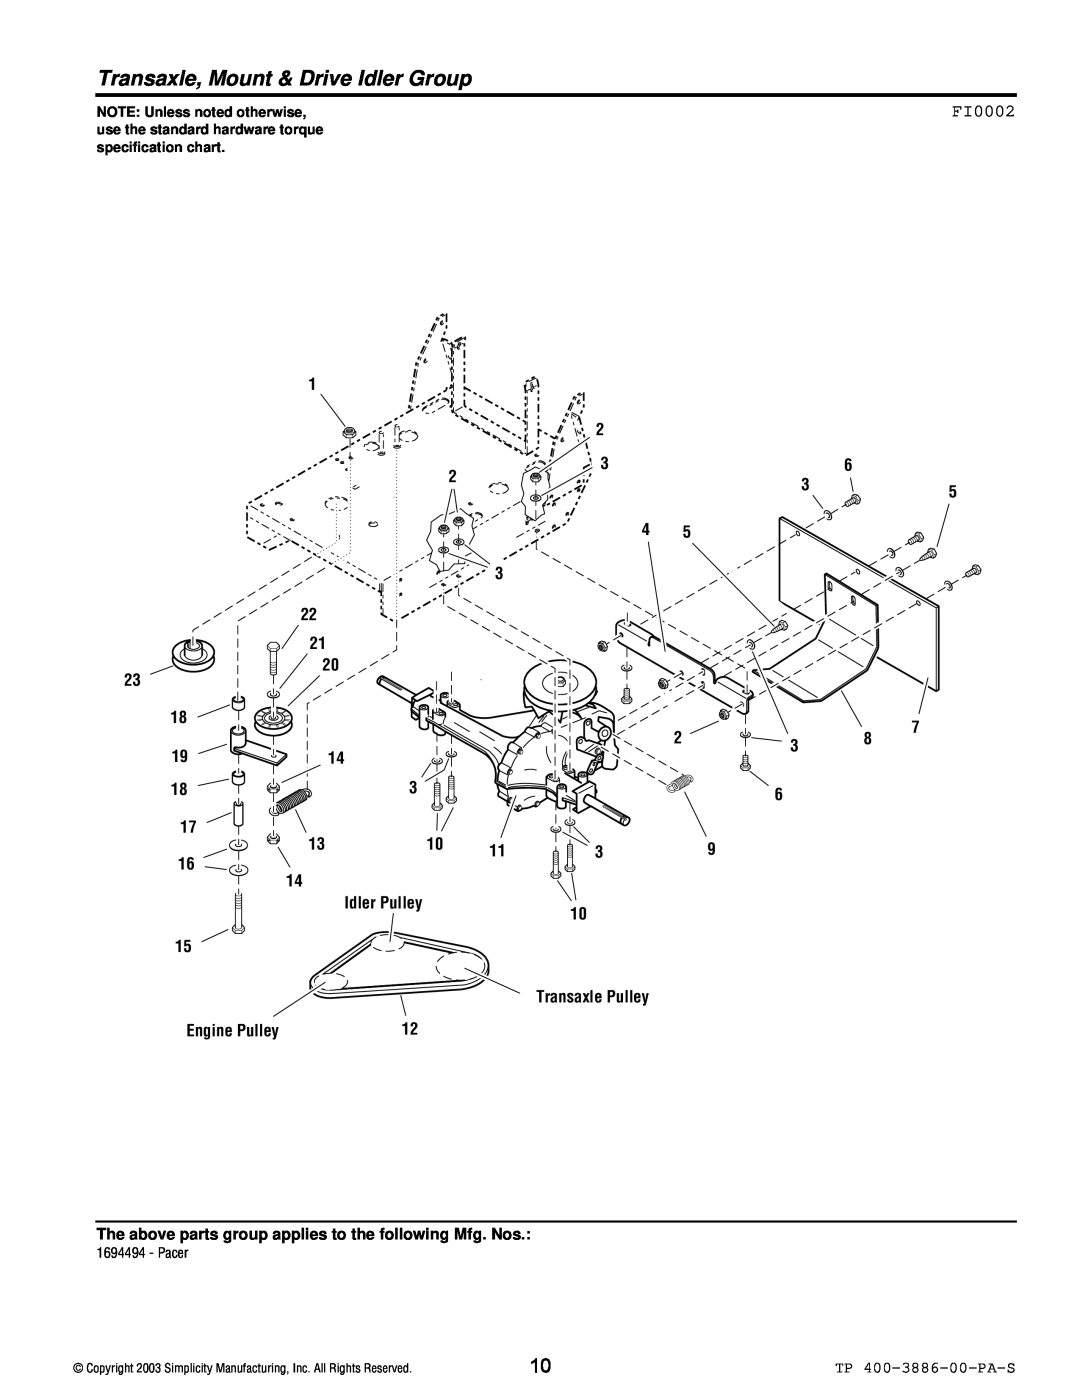 Simplicity Series Transaxle manual Transaxle, Mount & Drive Idler Group, Idler Pulley, Transaxle Pulley, Engine Pulley 